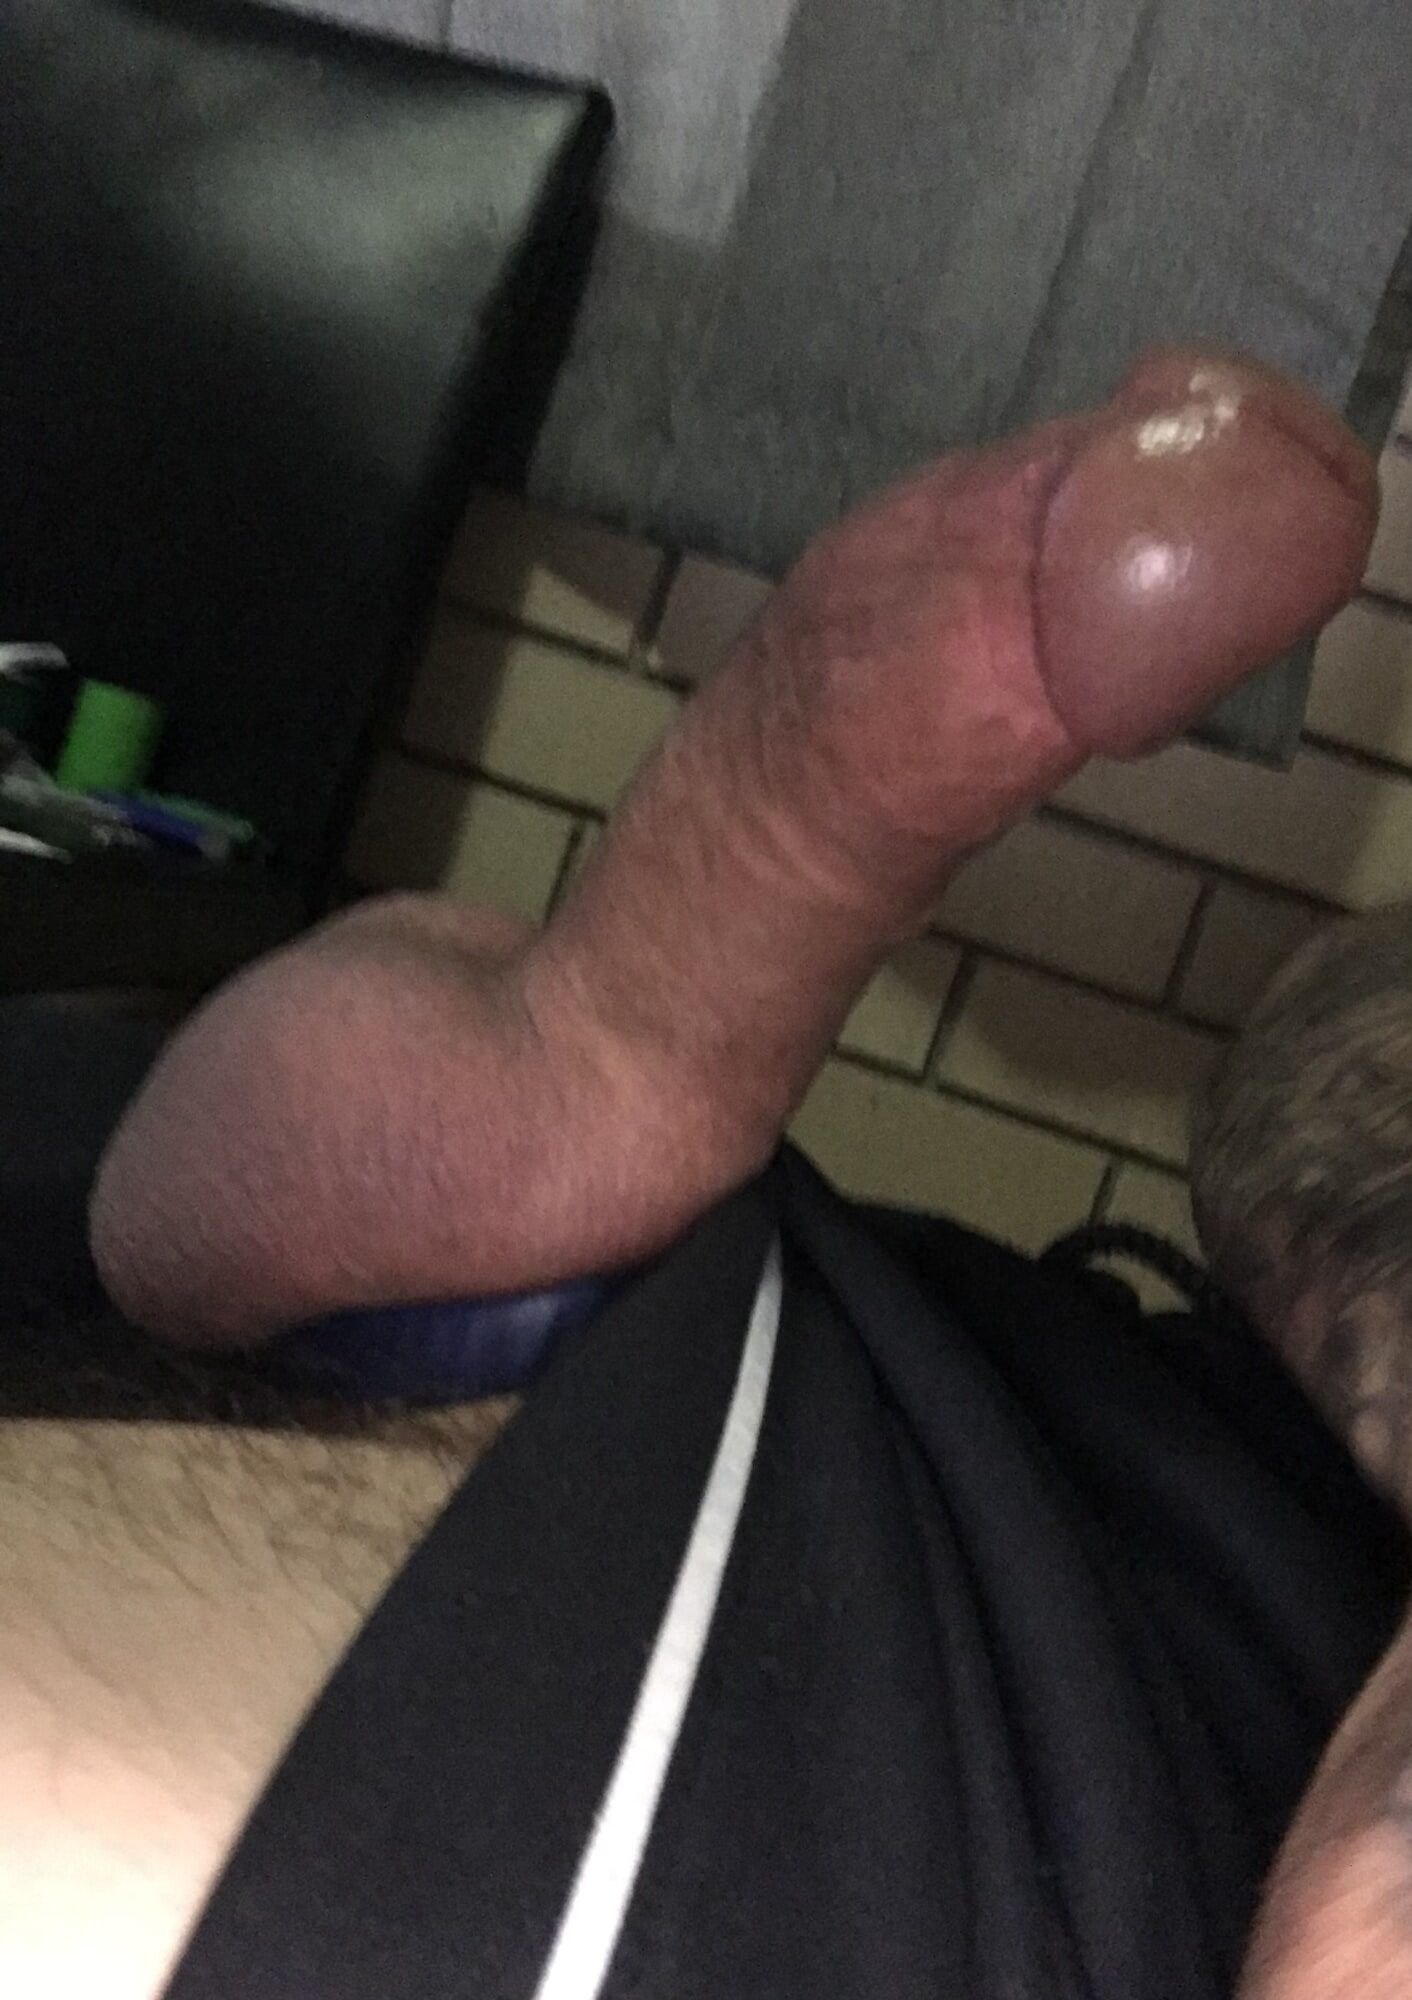 Showing my cock please give rating #4